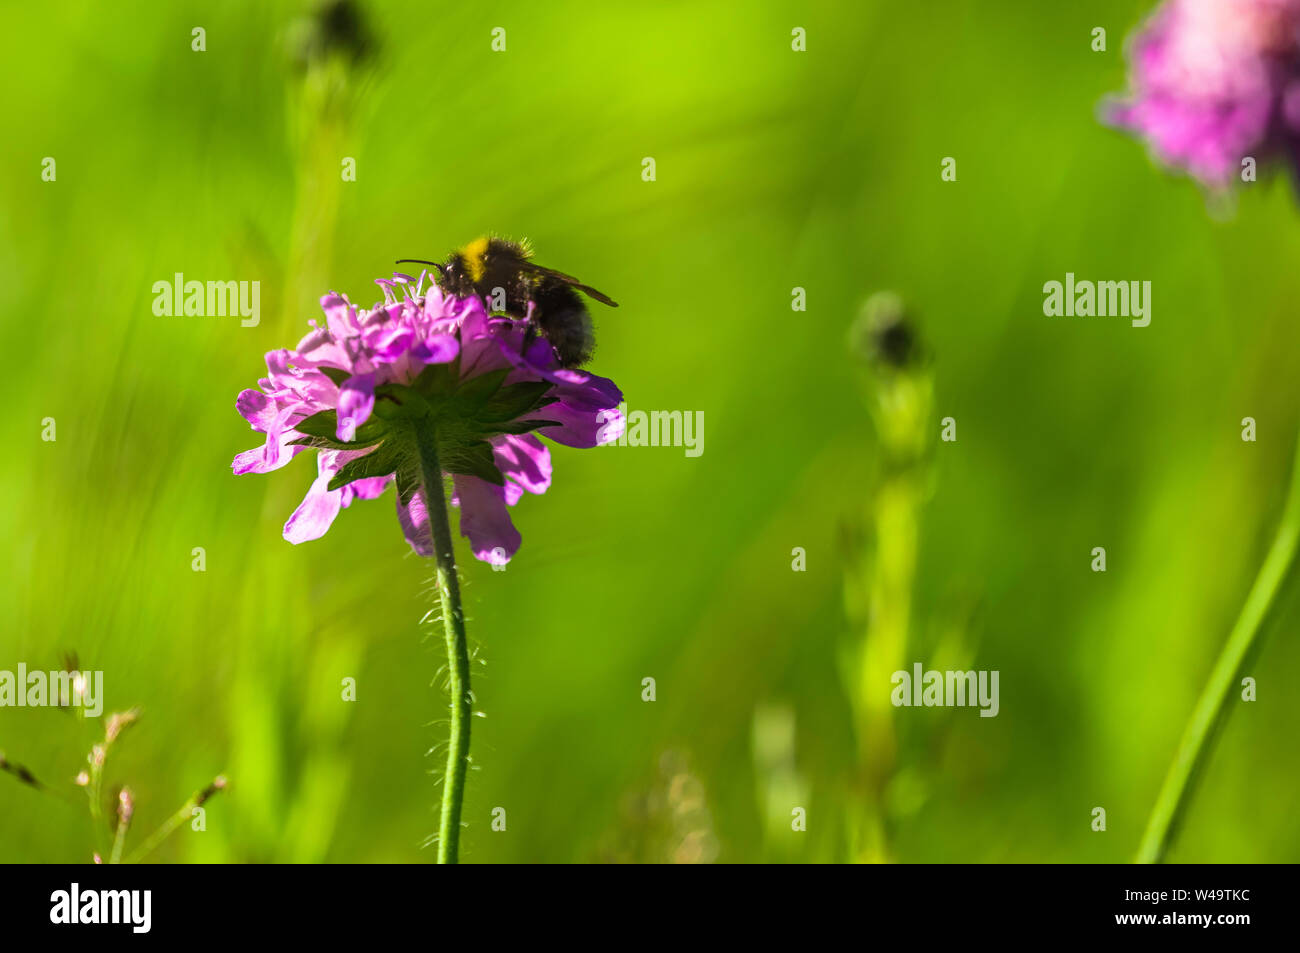 bumble bee feeding on a wild purple flower in the wild Stock Photo